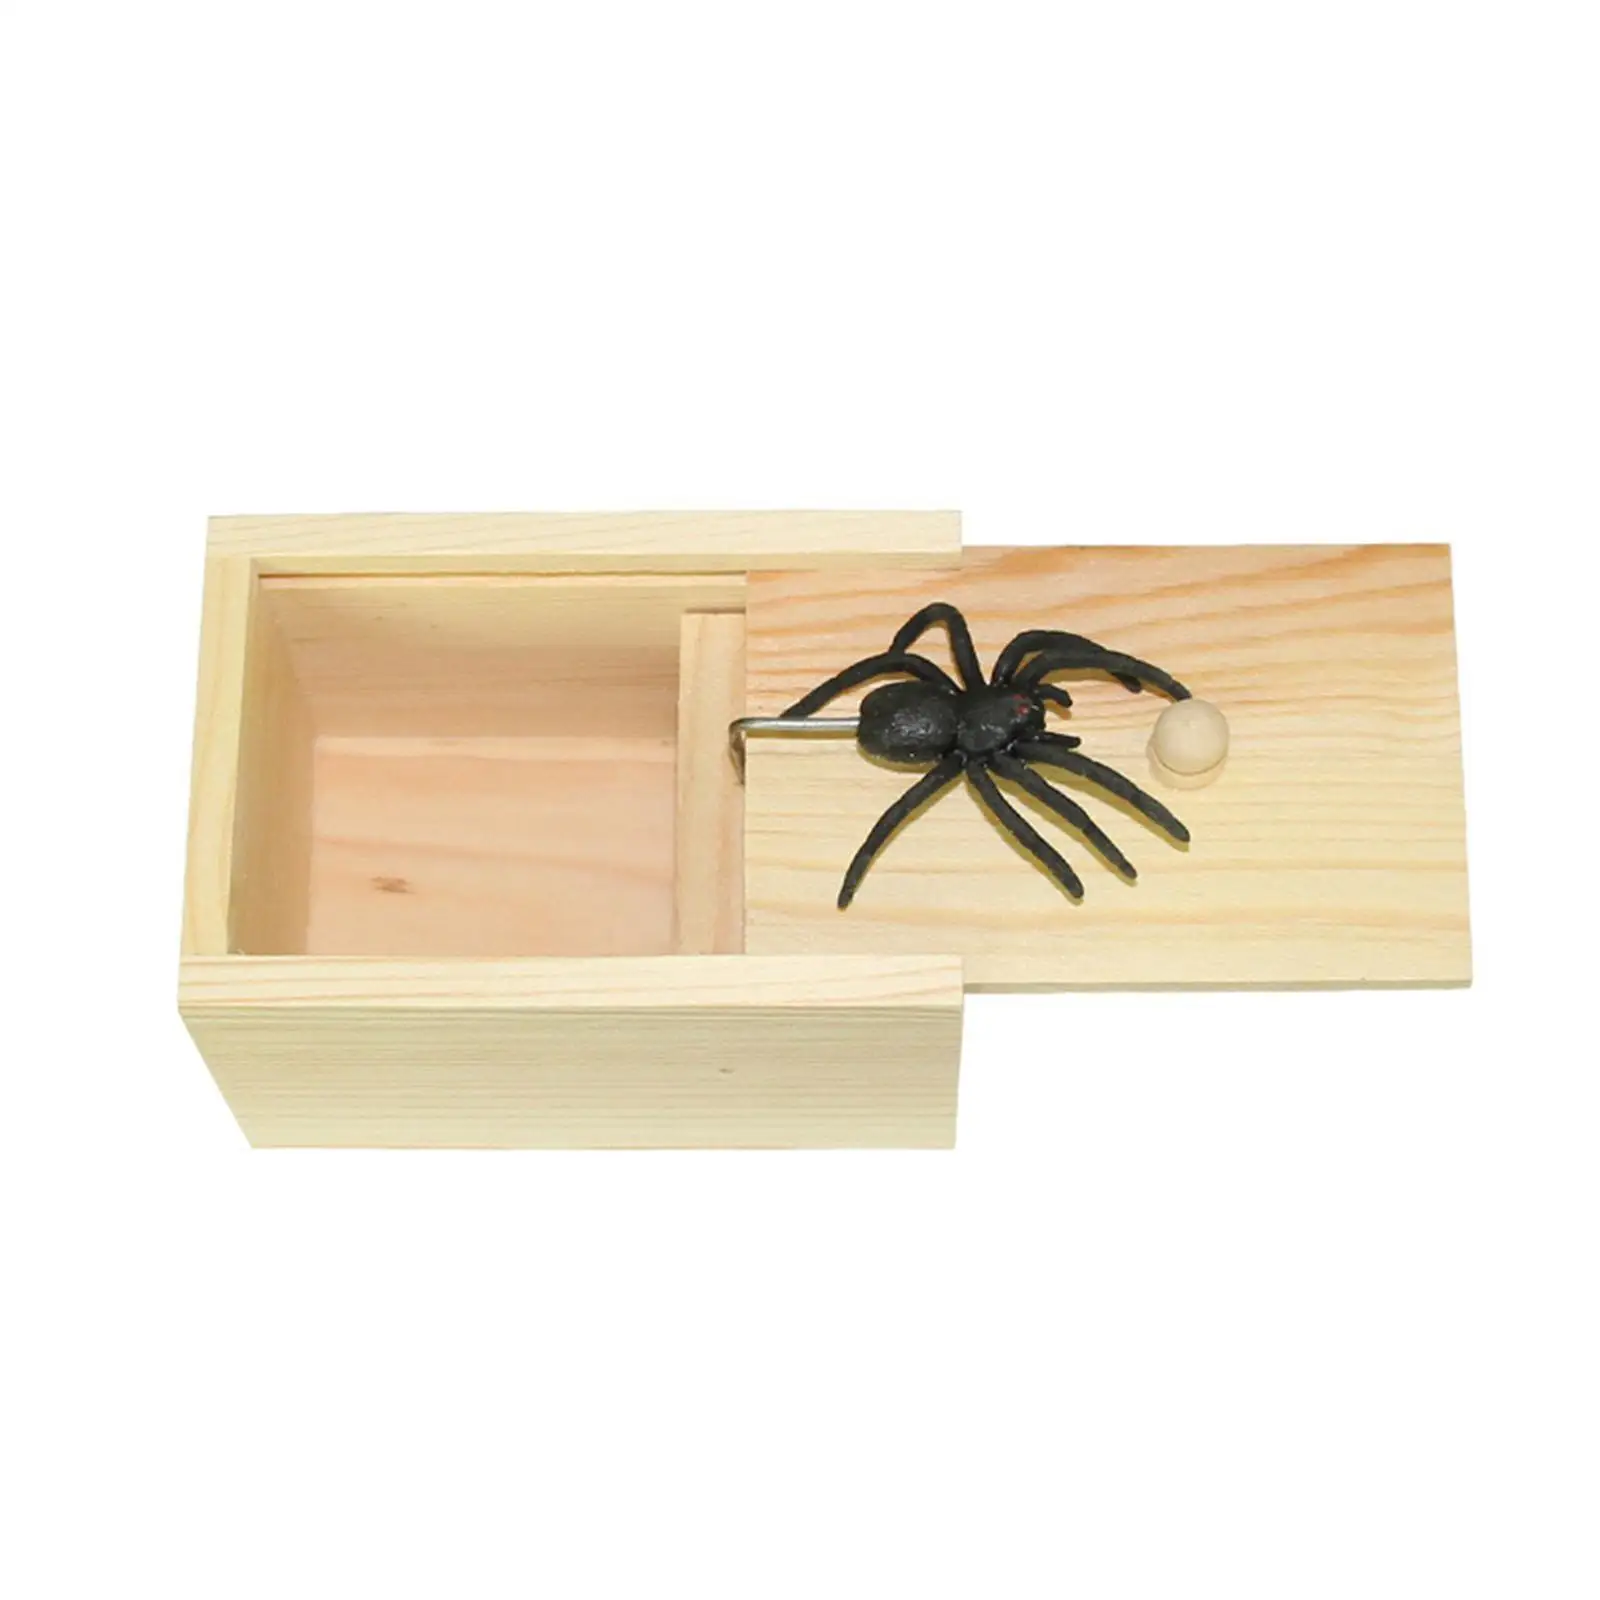 Spider prank case Tricky Toy Handmade Fun Practical Joke Boxes for Halloween Gifts